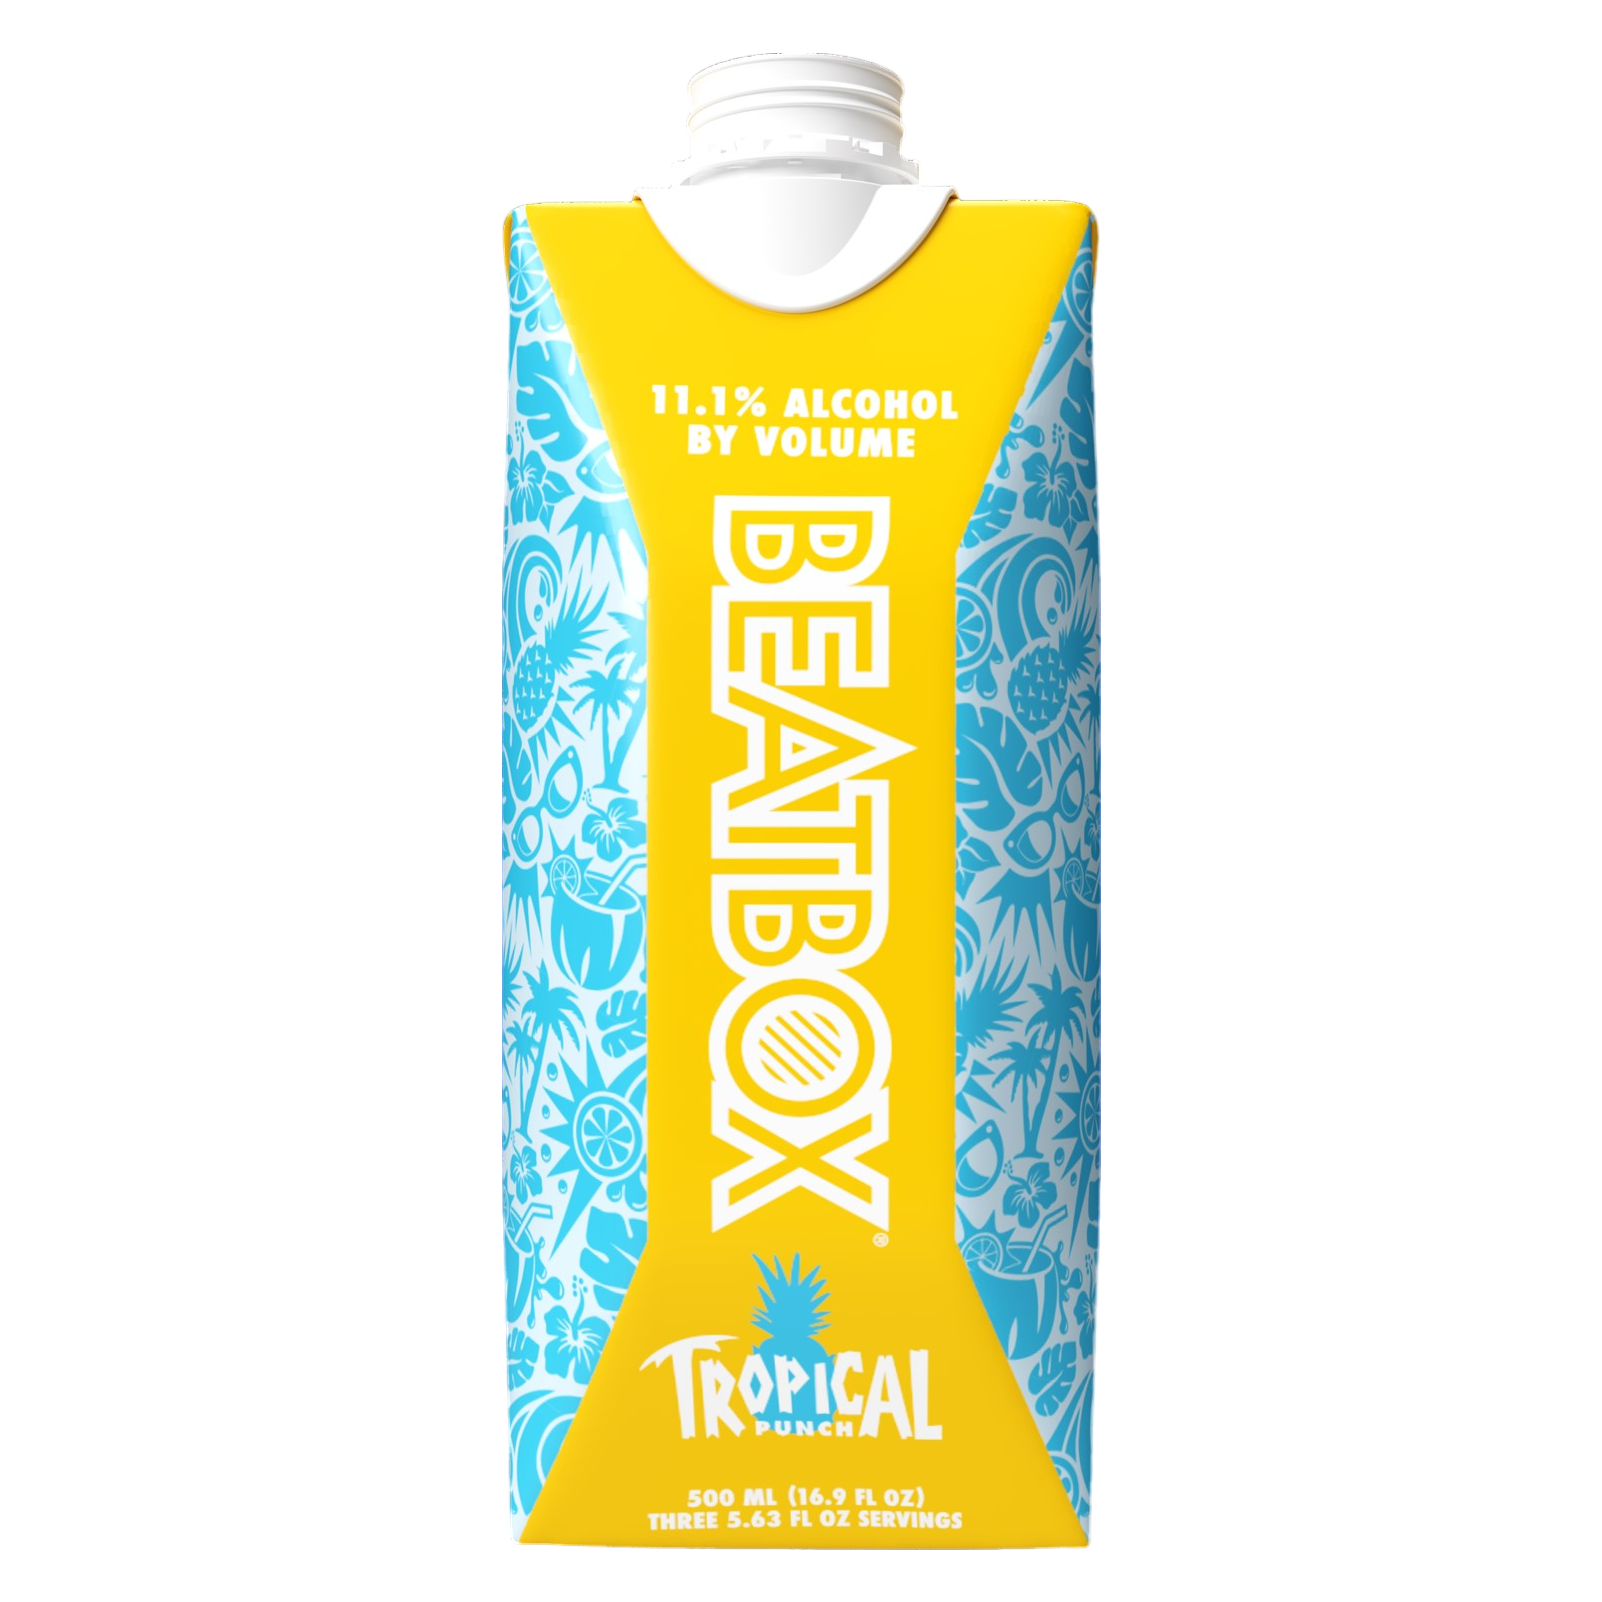 BeatBox Party Tropical Punch 500ml 11.1% ABV Party Punch 